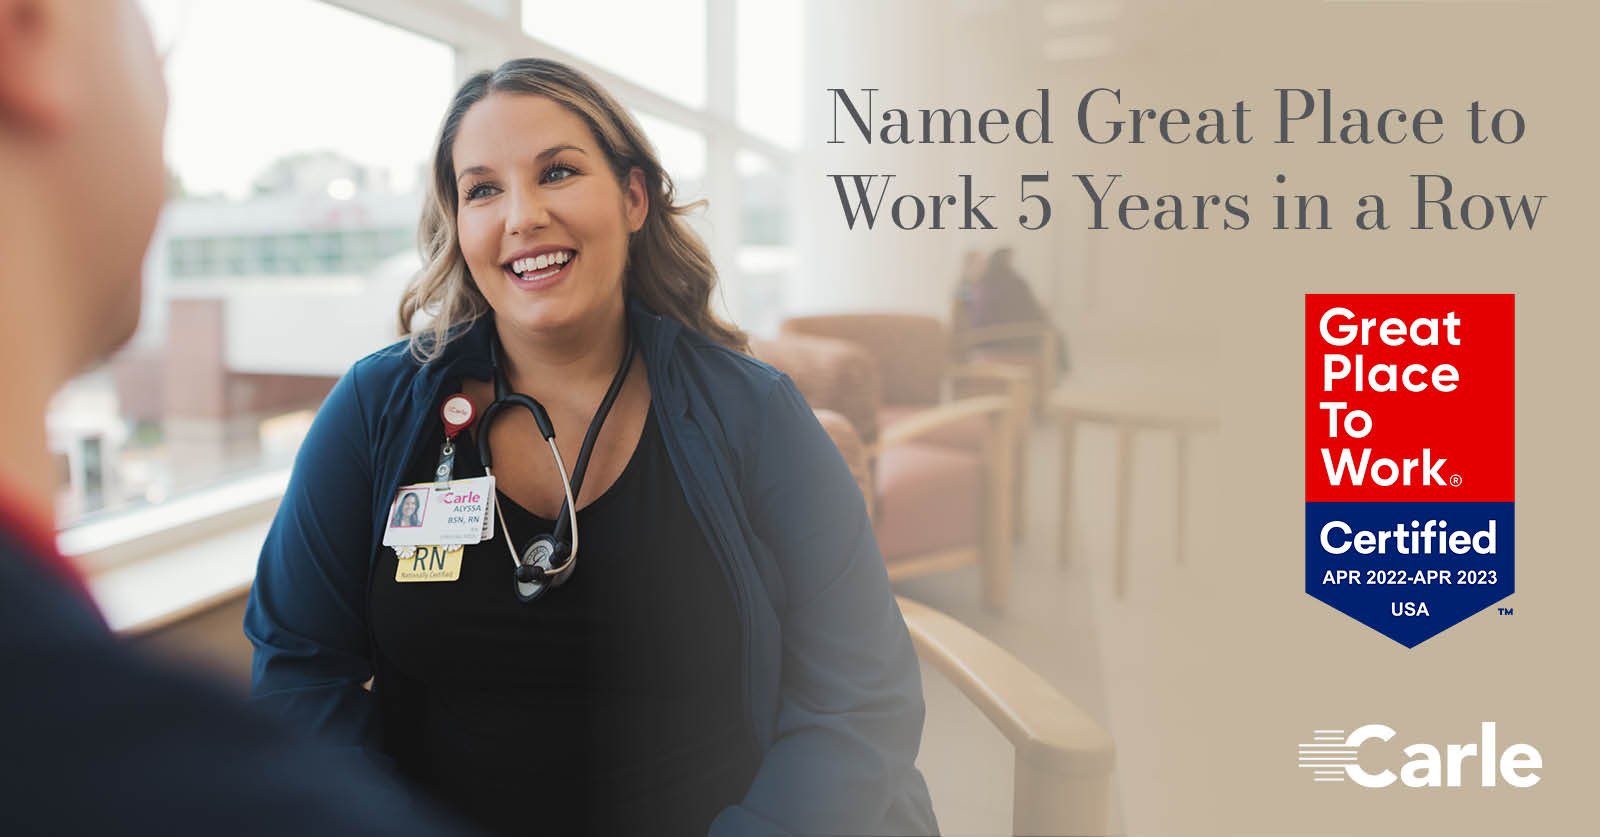 Carle Health recognized as a leading place to work in healthcare